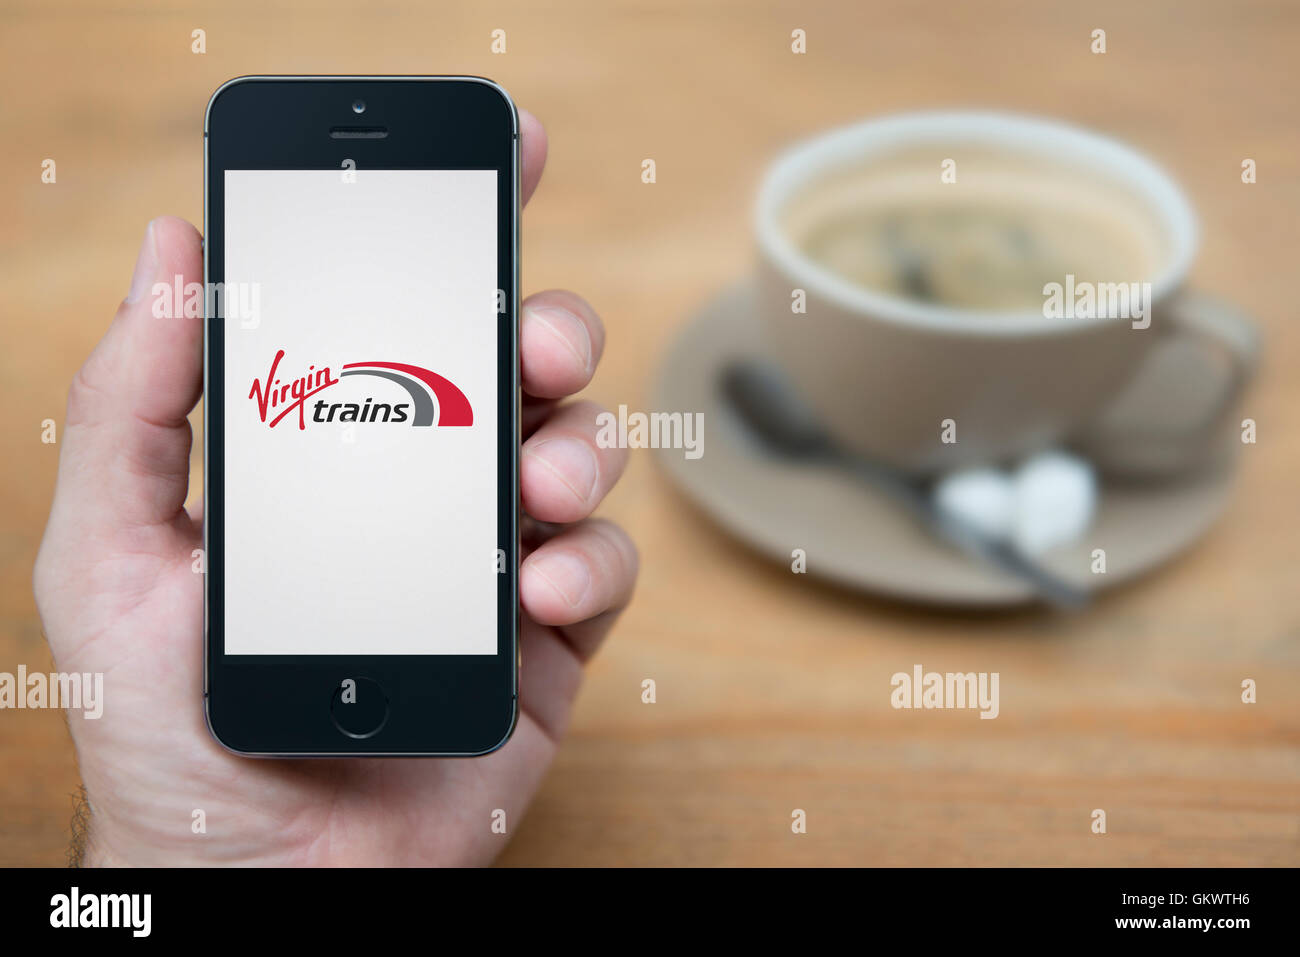 A man looks at his iPhone which displays the Virgin Trains logo, while sat with a cup of coffee (Editorial use only). Stock Photo